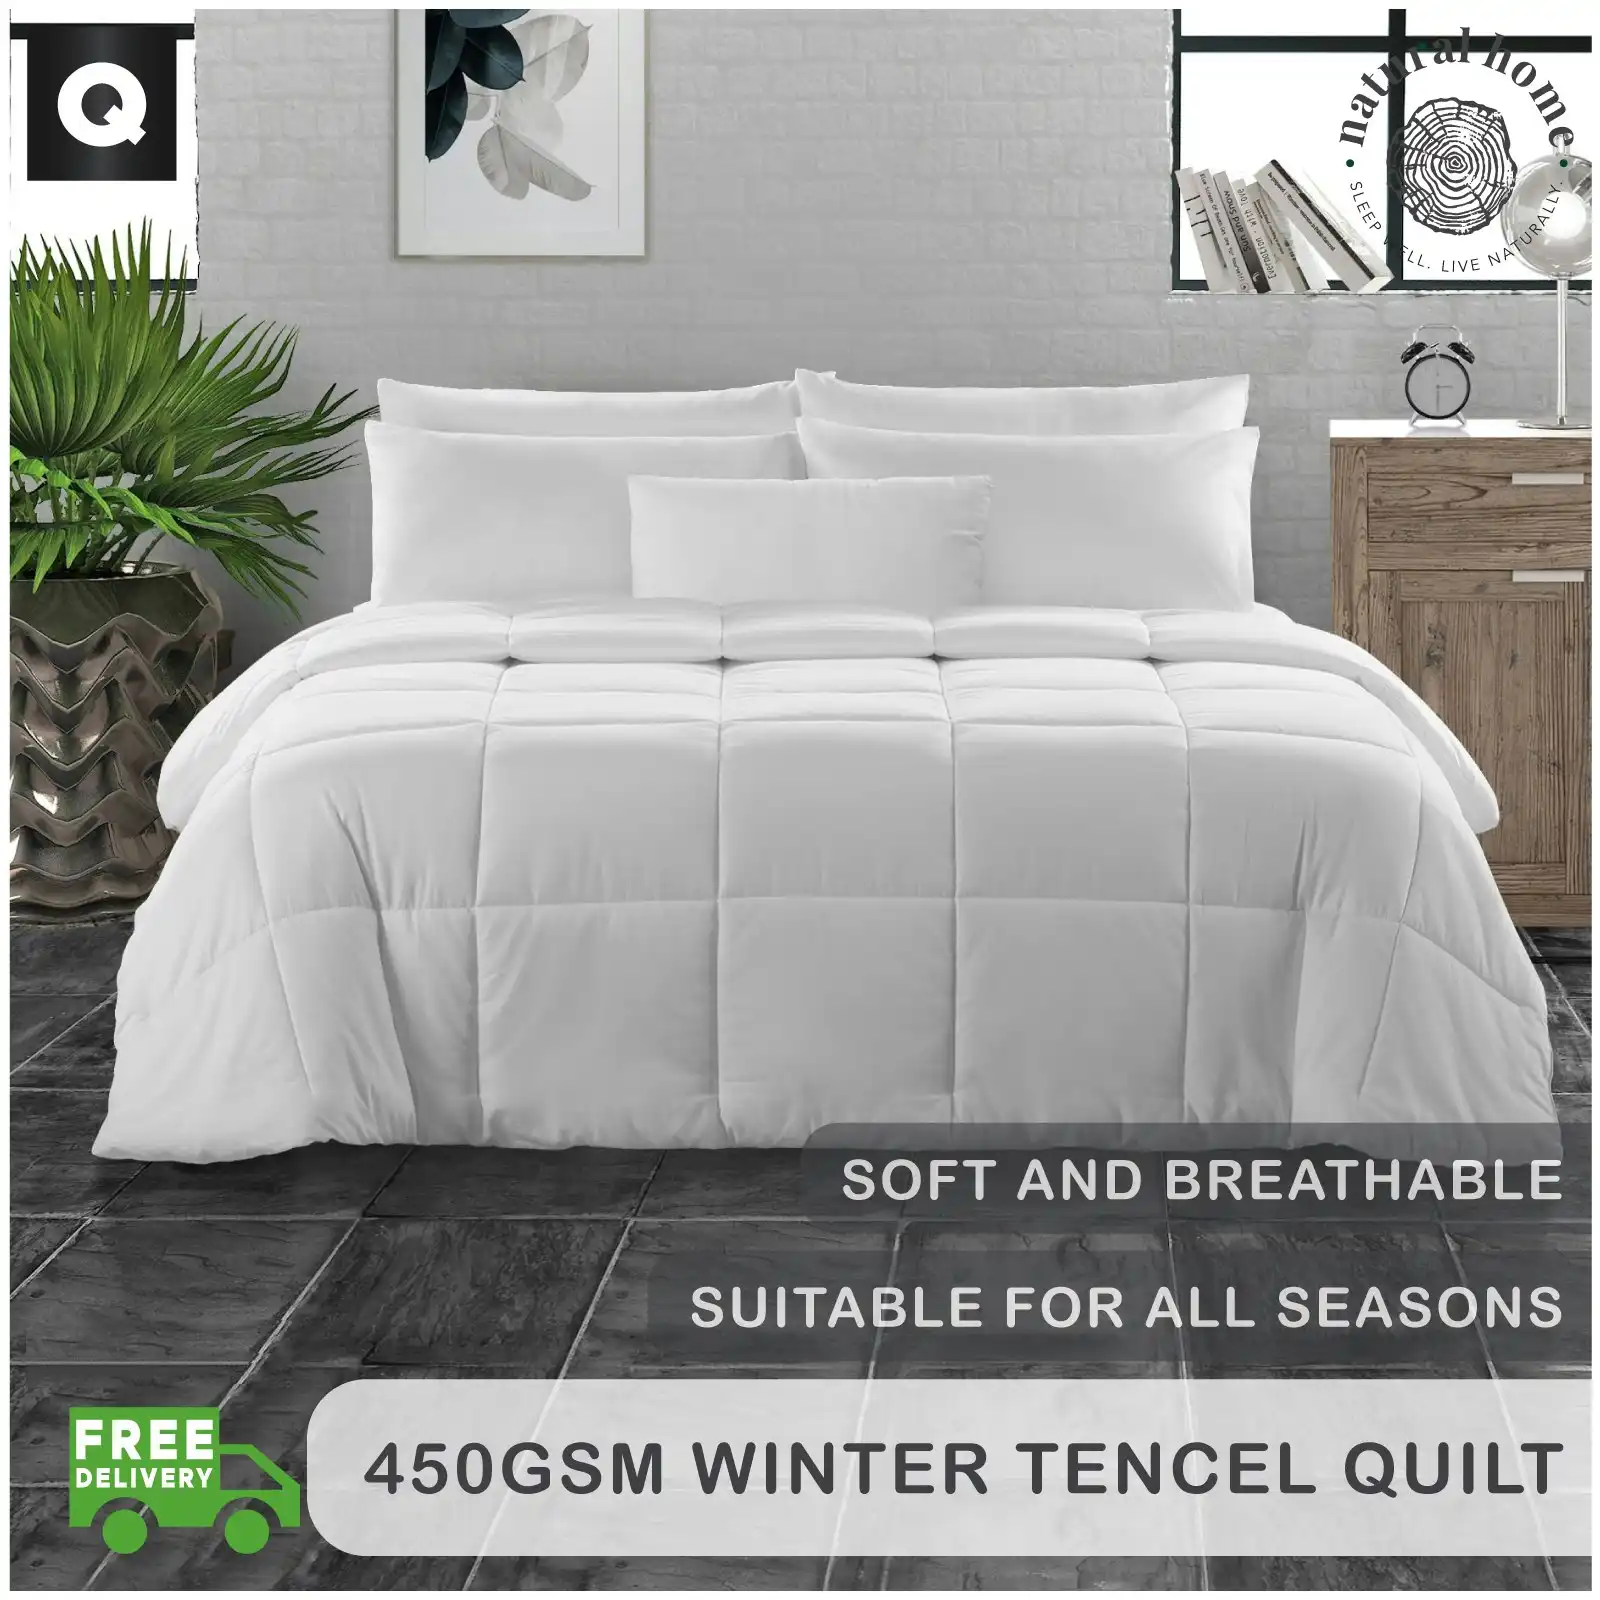 Natural Home Winter Tencel Quilt 450gsm - White - Queen Bed